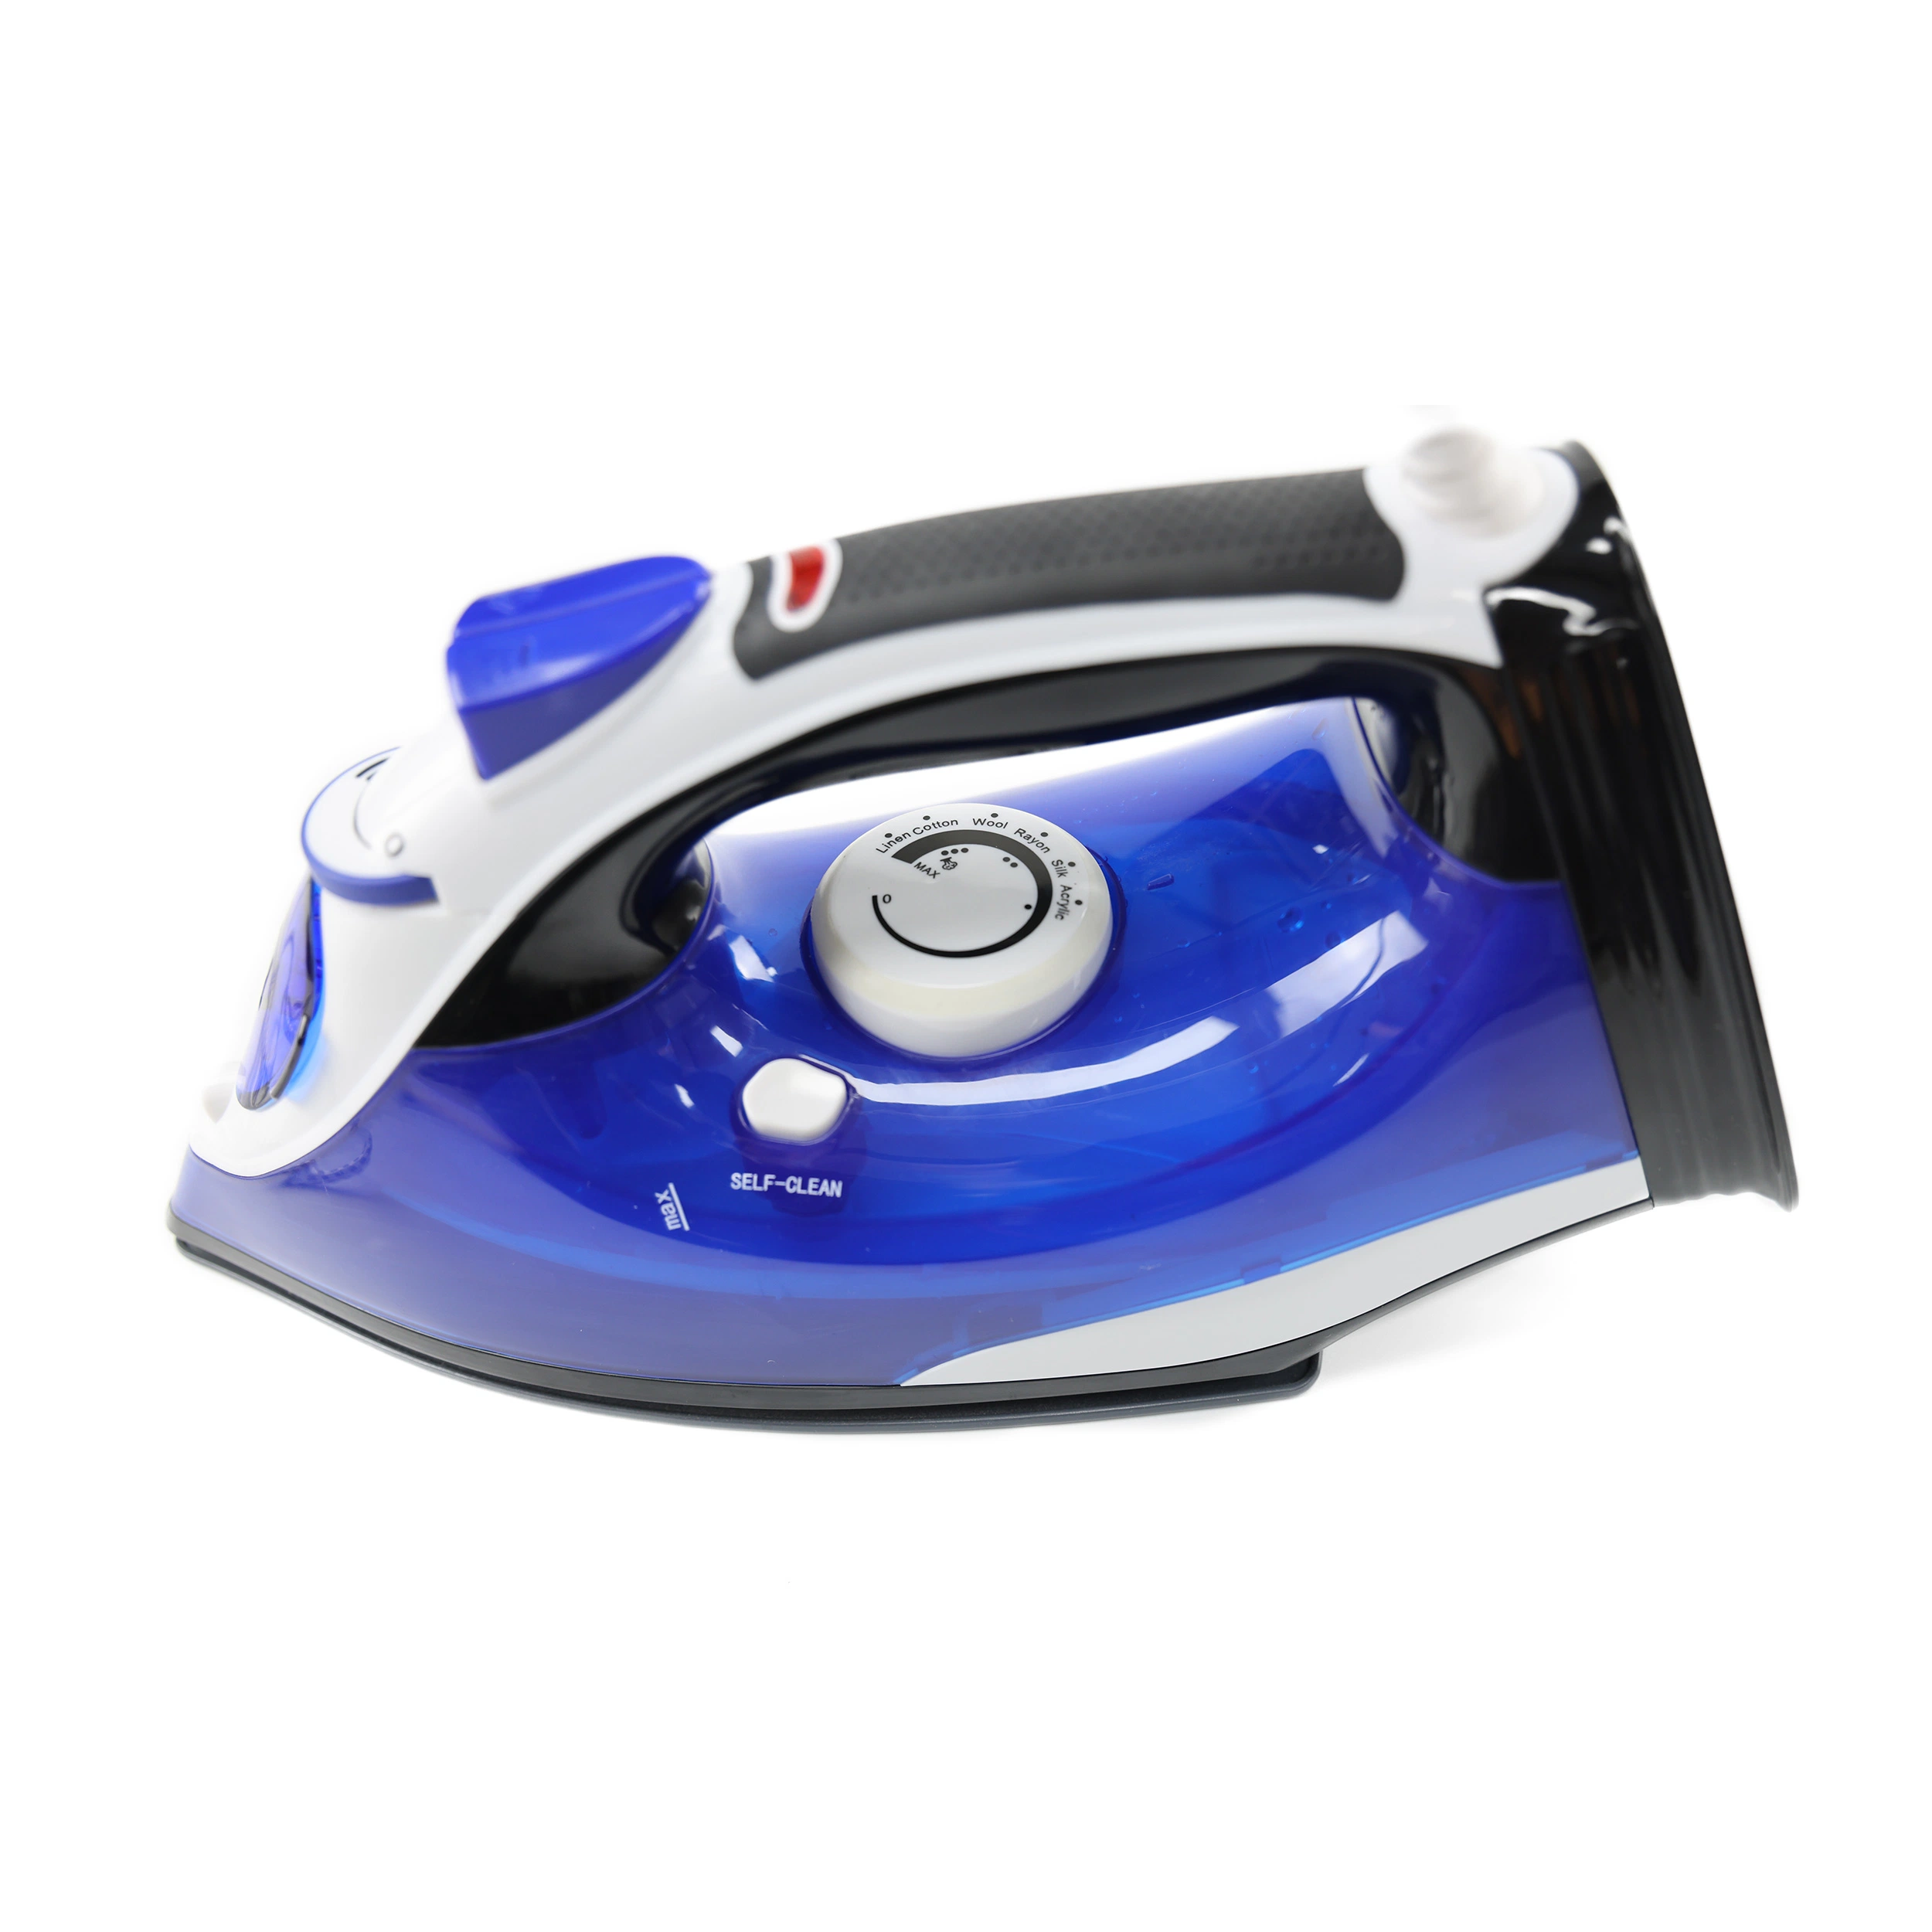 ETL, GS, CE, CB, Approved Middle Steam Iron with Steam Ironing/ Dry Ironing/Steam Jet, Water Spray, Continuous Strong Steam, Burst Steam, Self- Cleaning